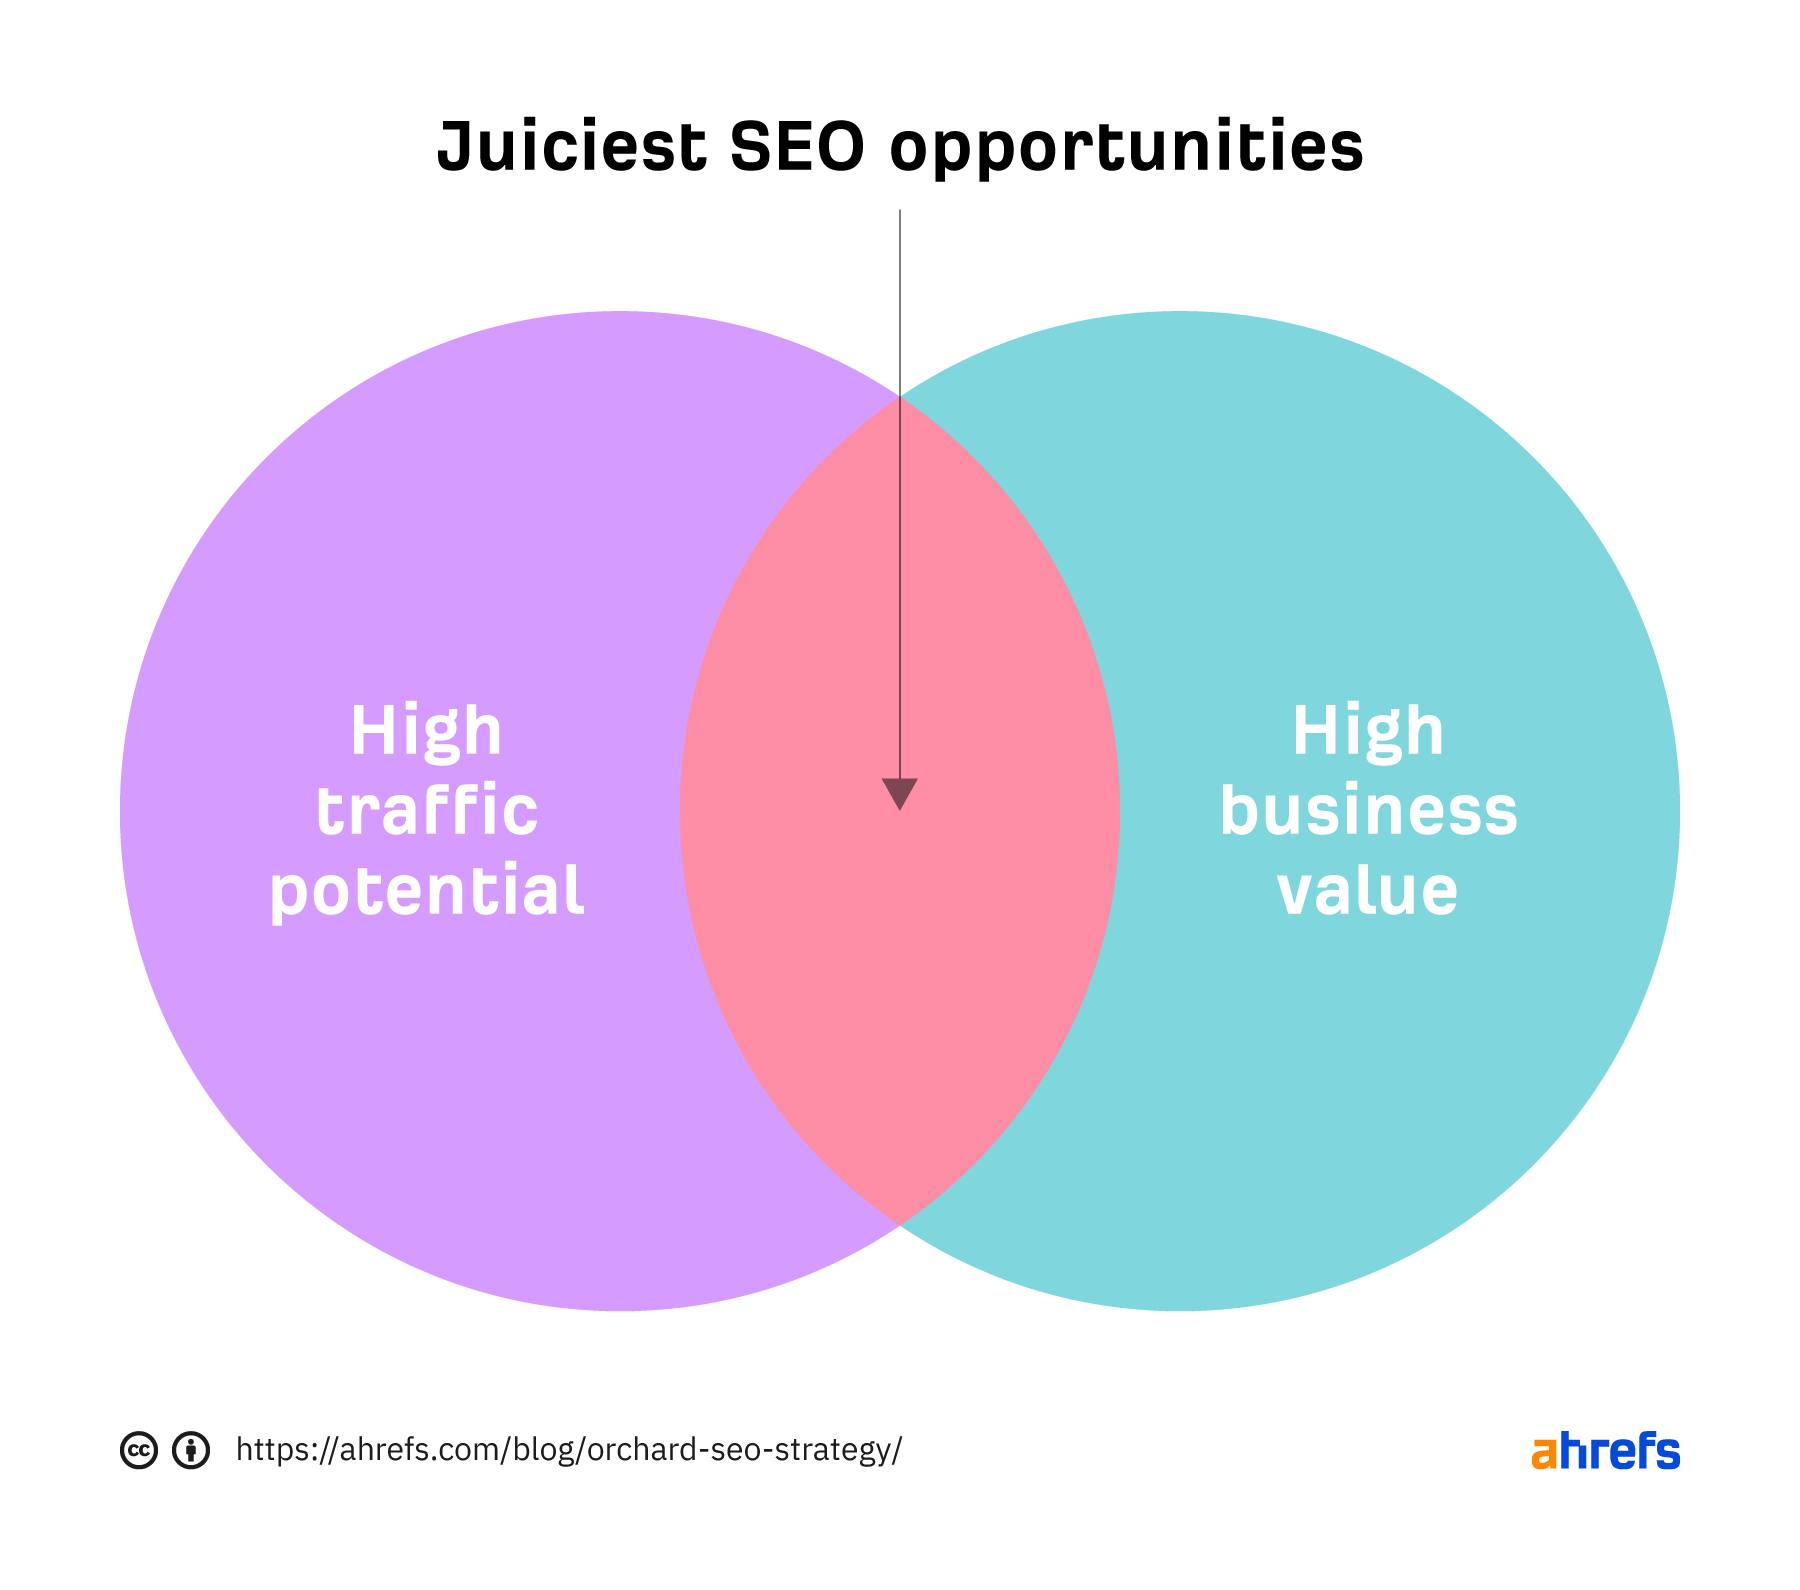 How to find the juiciest SEO opportunities